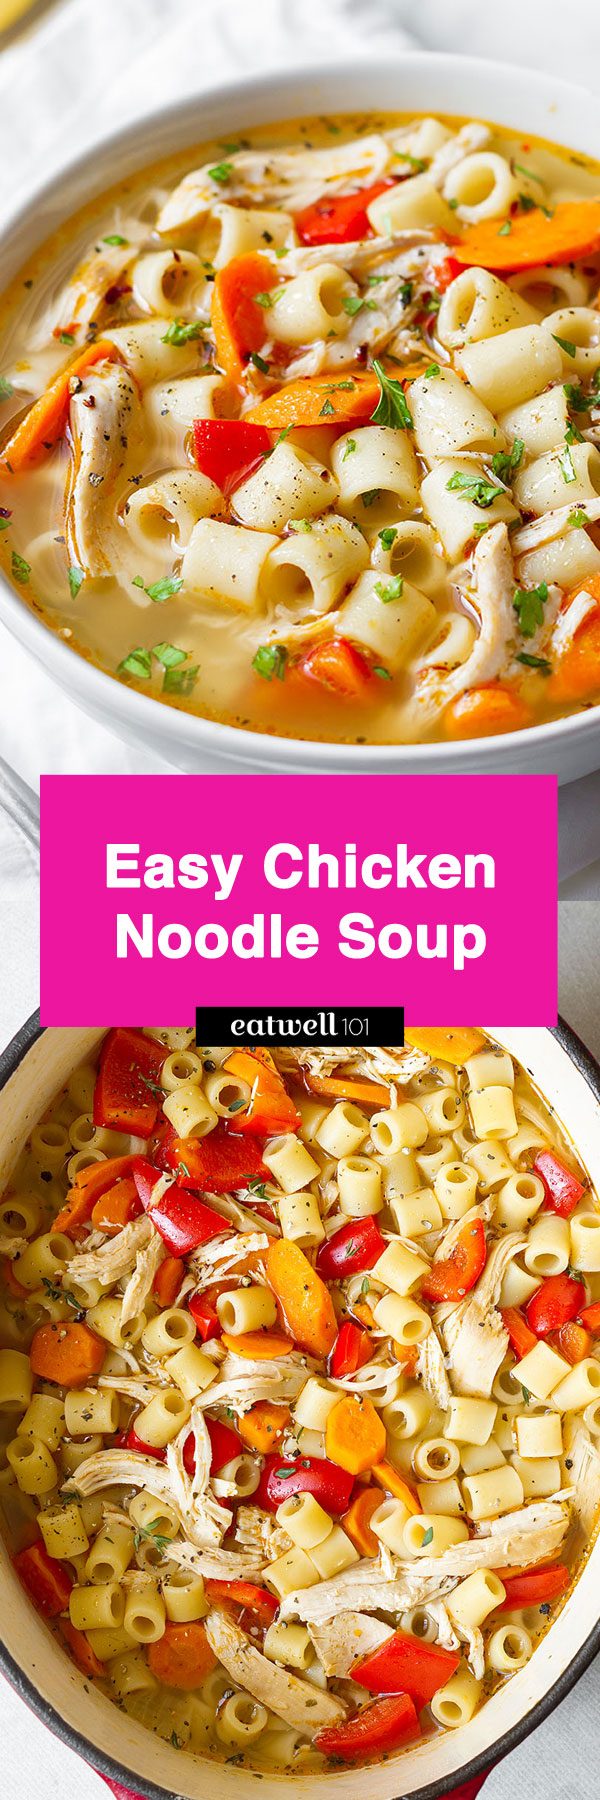 Chicken noodle soup - #chicken #noodle #soup #recipe #eatwell101 -  Homemade chicken noodle soup loaded with chunky vegetables and tender noodles will fill your stomach and soothe your soul!